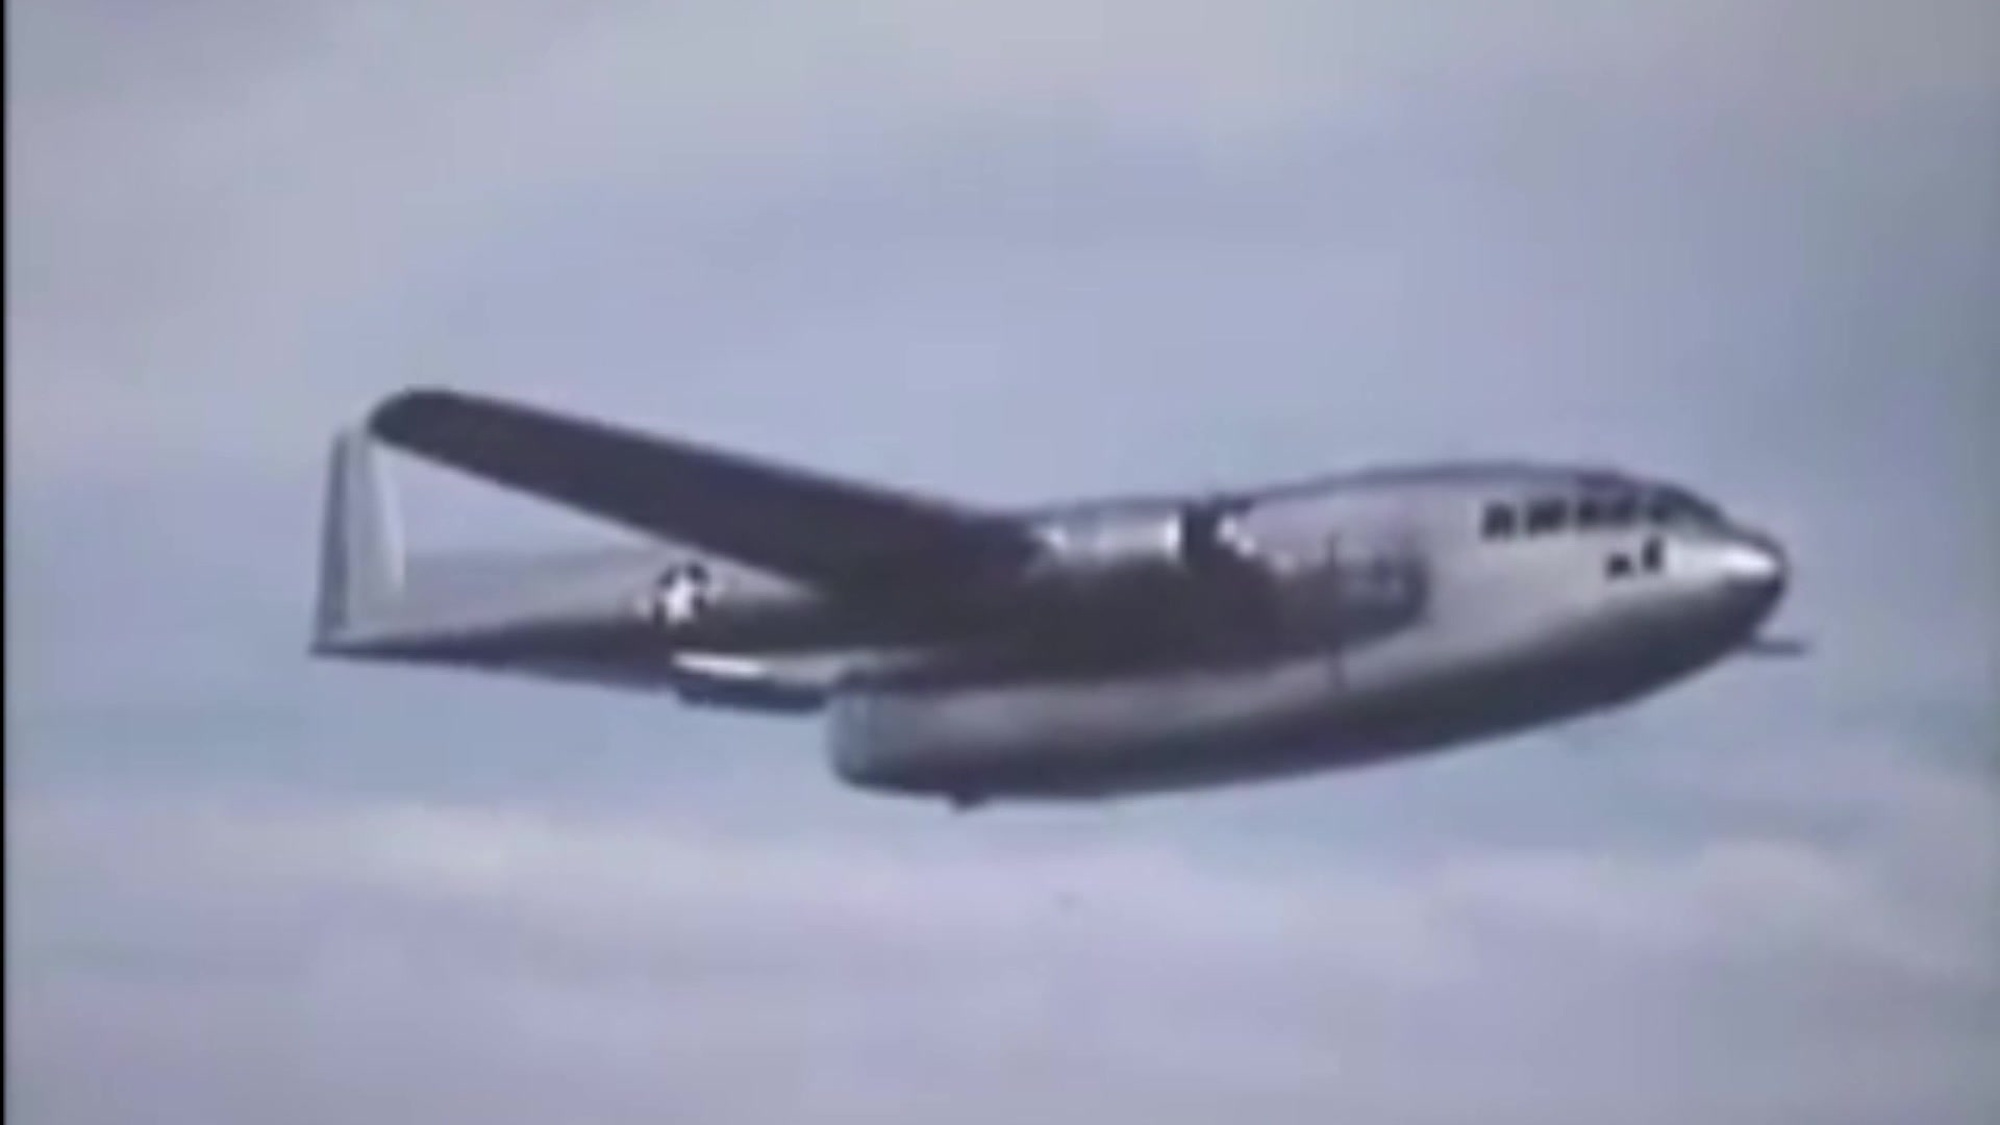 A video that traces the history of the Niagara Falls Air Reserve Station's lineage back to World War II where they operated as the 3rd Combat Cargo Squadron where they flew the C-47 Skytrain. The 914th ARW would go on to fly the C-119 Flying Boxcar, C-130 Hercules, and their current air frame the KC-135 Stratotanker.